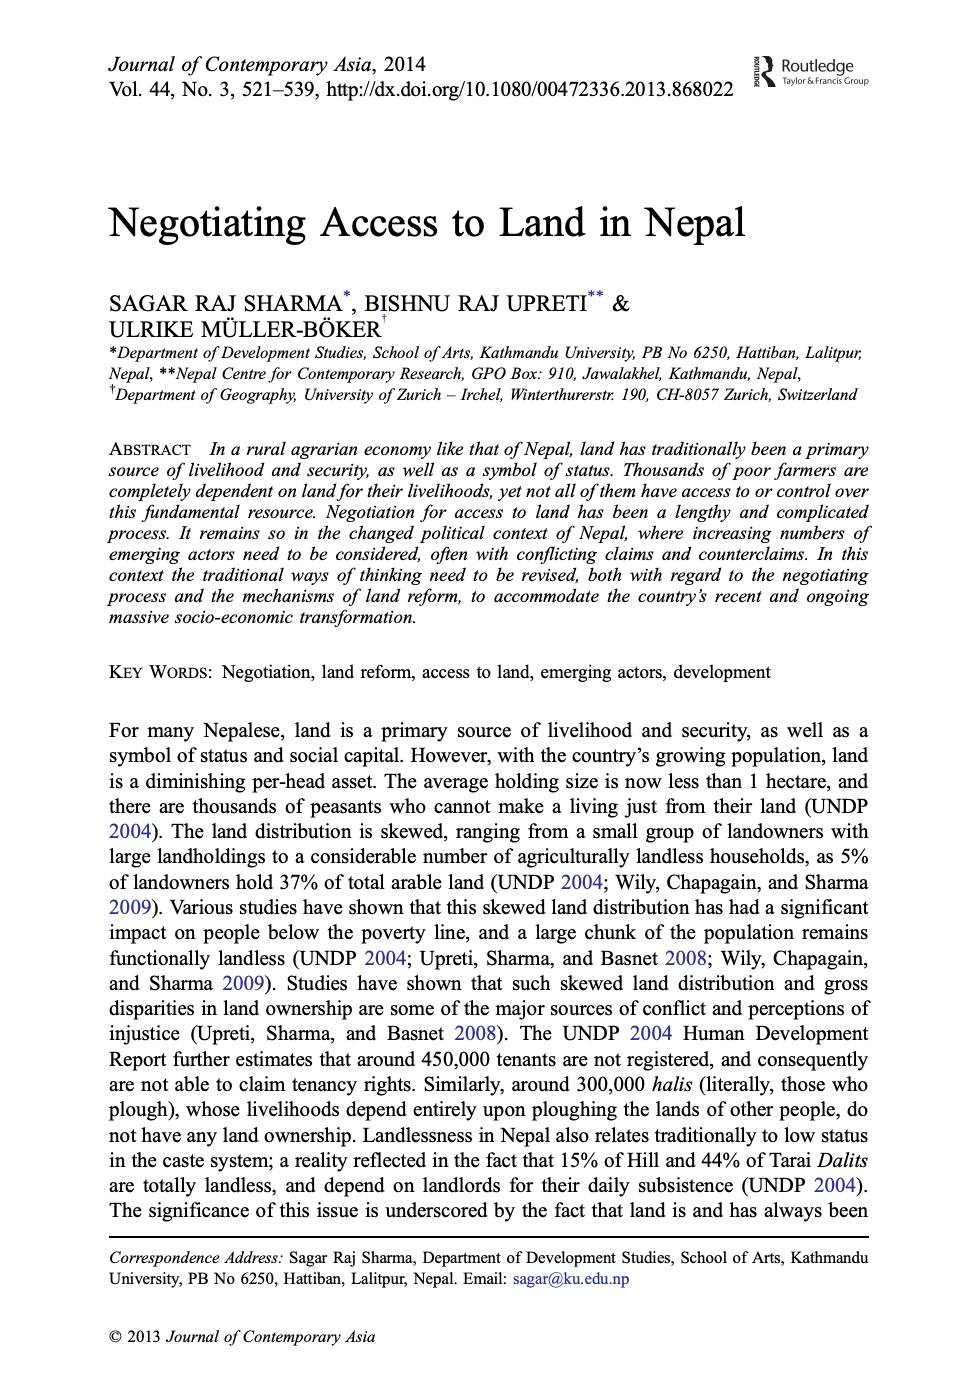 Negotiating Access to Land in Nepal